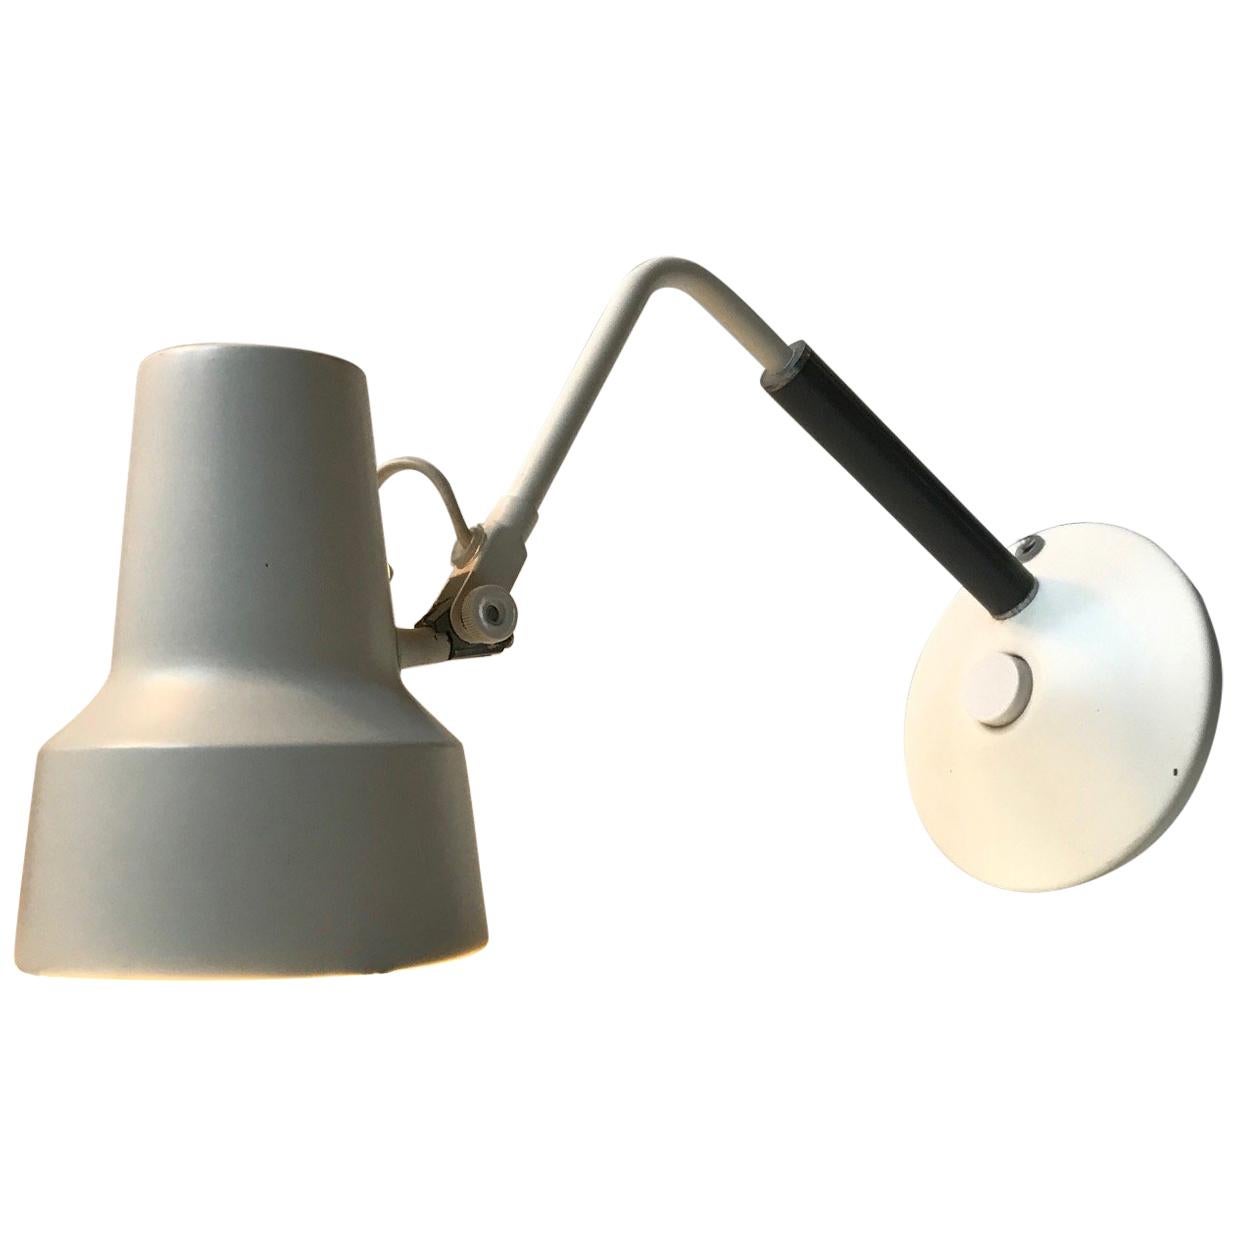 White and grey table lamp designed by Jac Jacobsen for his own company Jac Jacobsen A/S in Norway during the late 1950s. It is called L-11 and it features a grey acrylic handle, porcelain fitting, wall mount option, jumbo switch and adjustable